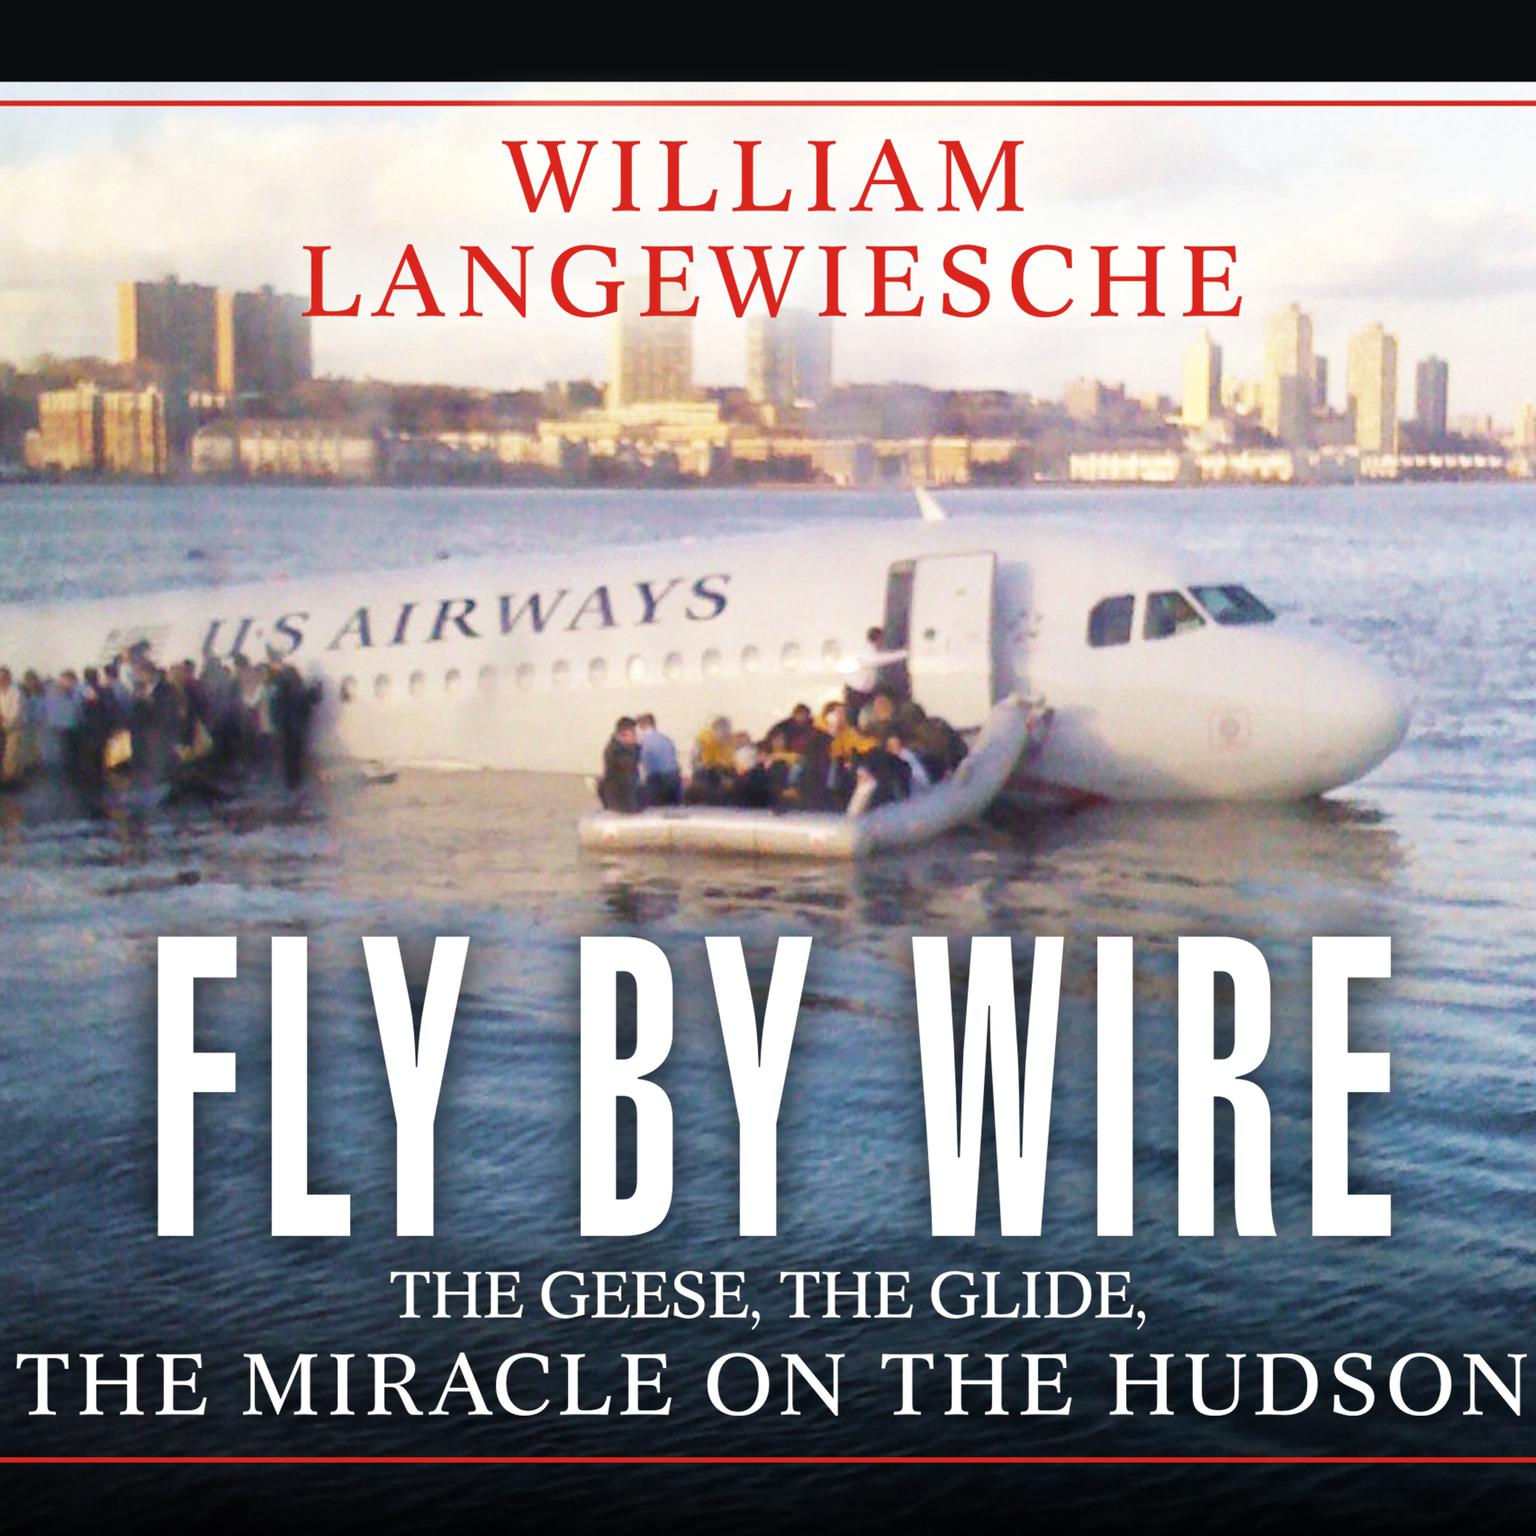 Fly by Wire: The Geese, the Glide, the Miracle on the Hudson Audiobook, by William Langewiesche